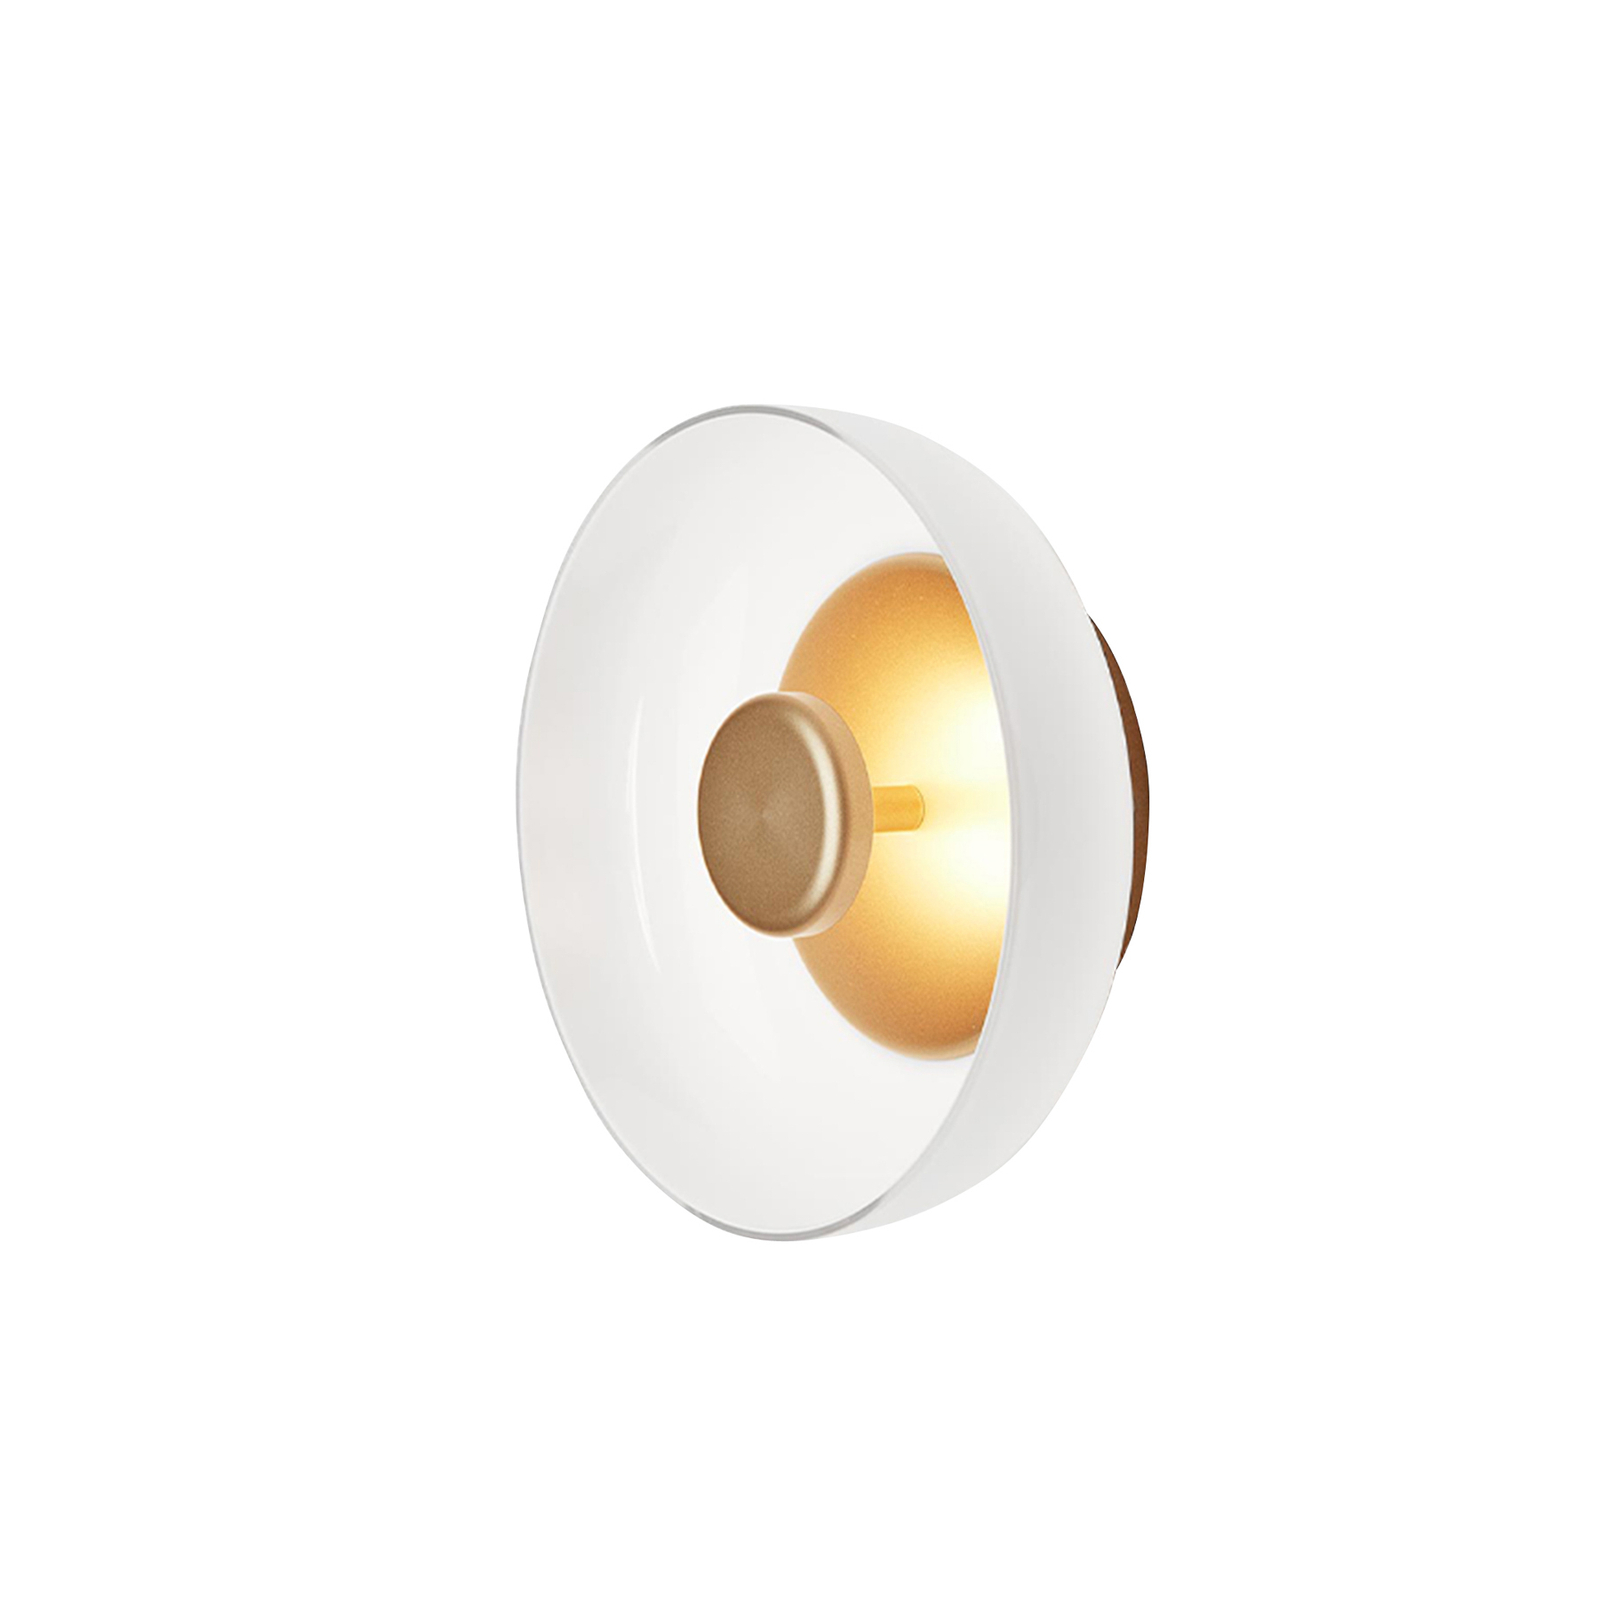 Nuura Blossi Wall/Ceiling LED wall light, white